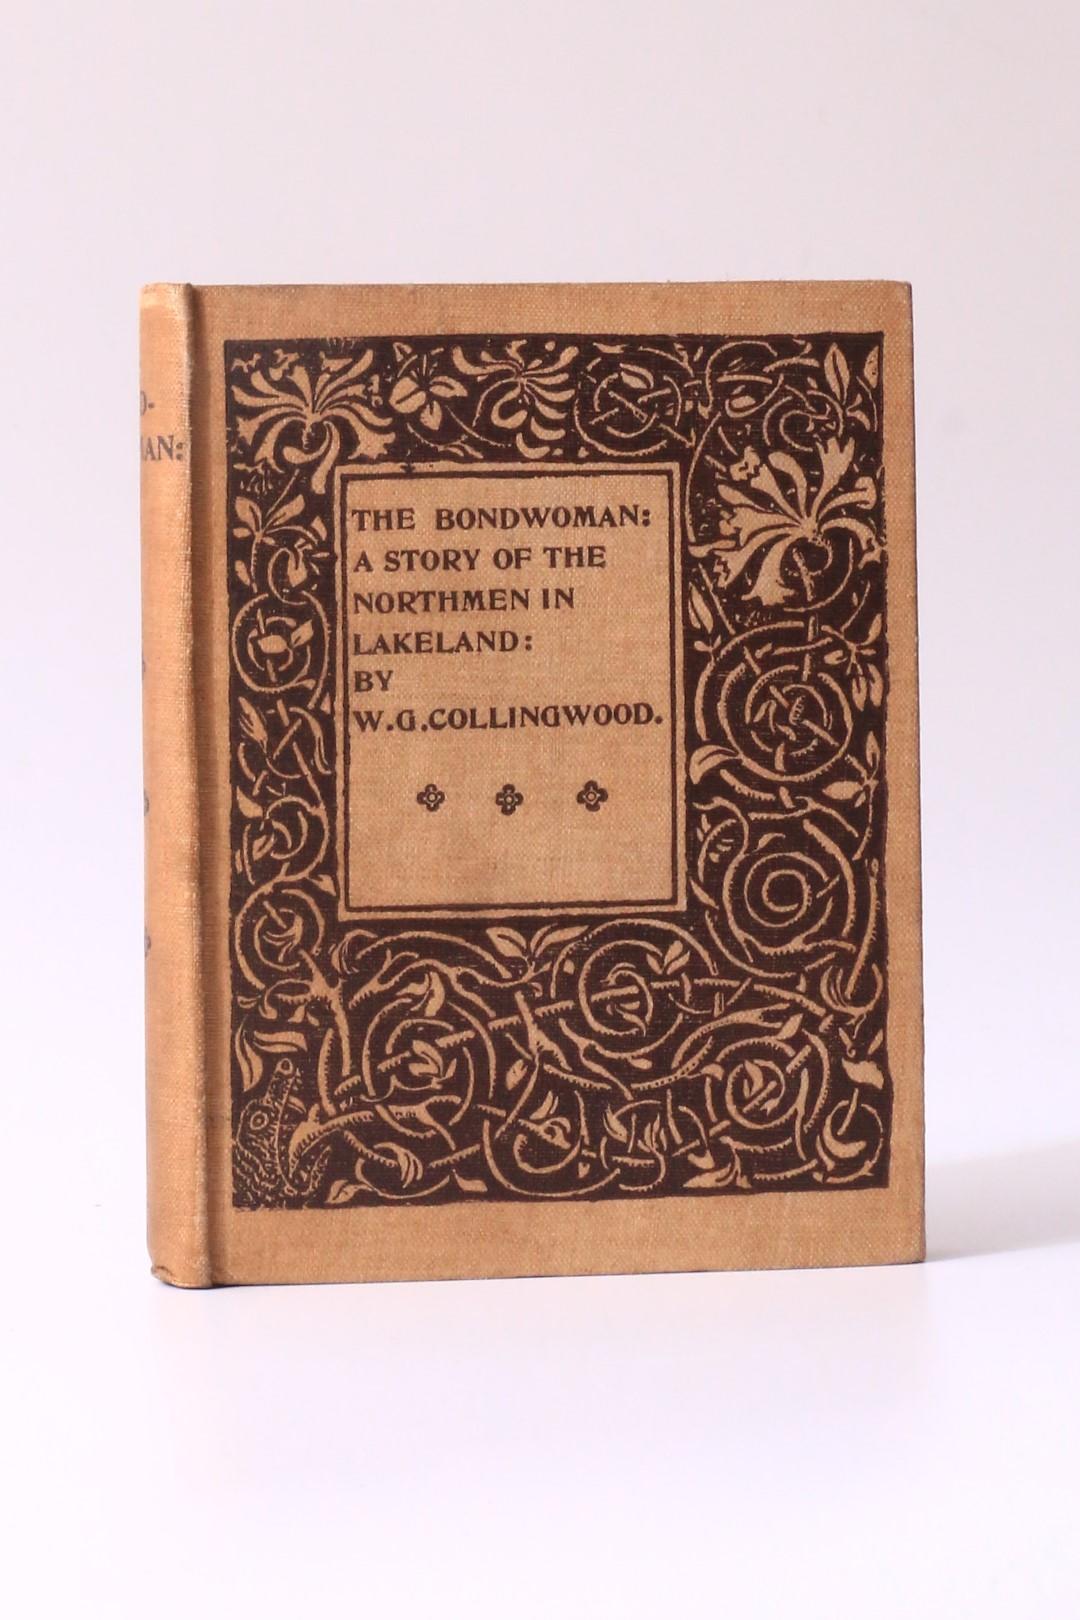 W.G. Collingwood - The Bondwoman: A Story of the Northmen in Lakeland - Edward Arnold, 1896, First Edition.